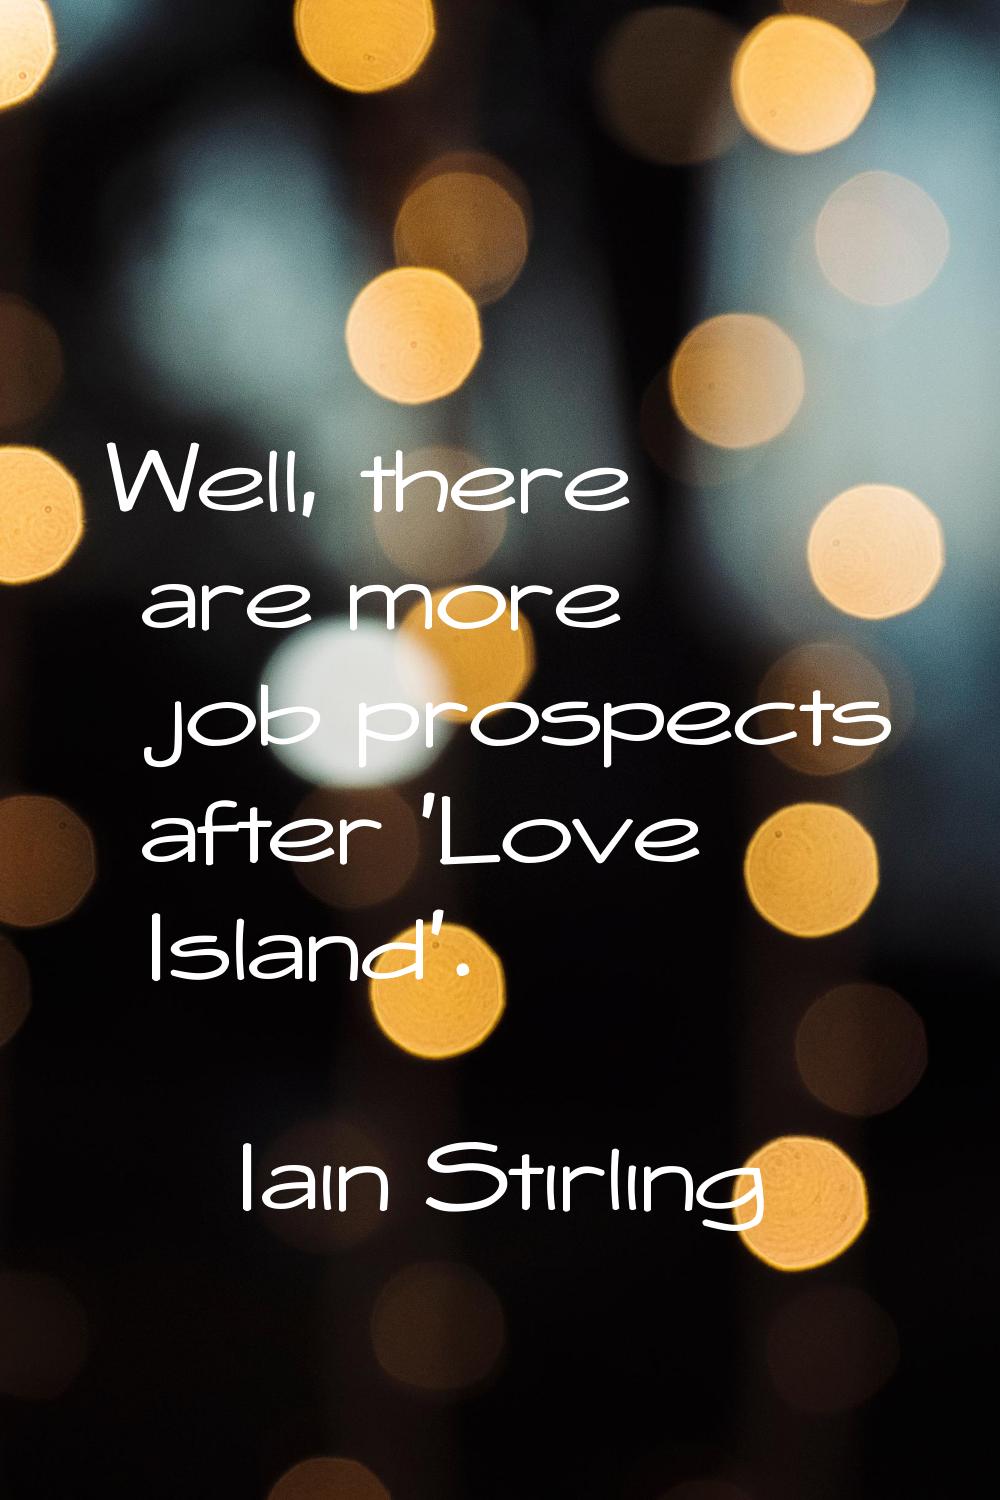 Well, there are more job prospects after 'Love Island'.